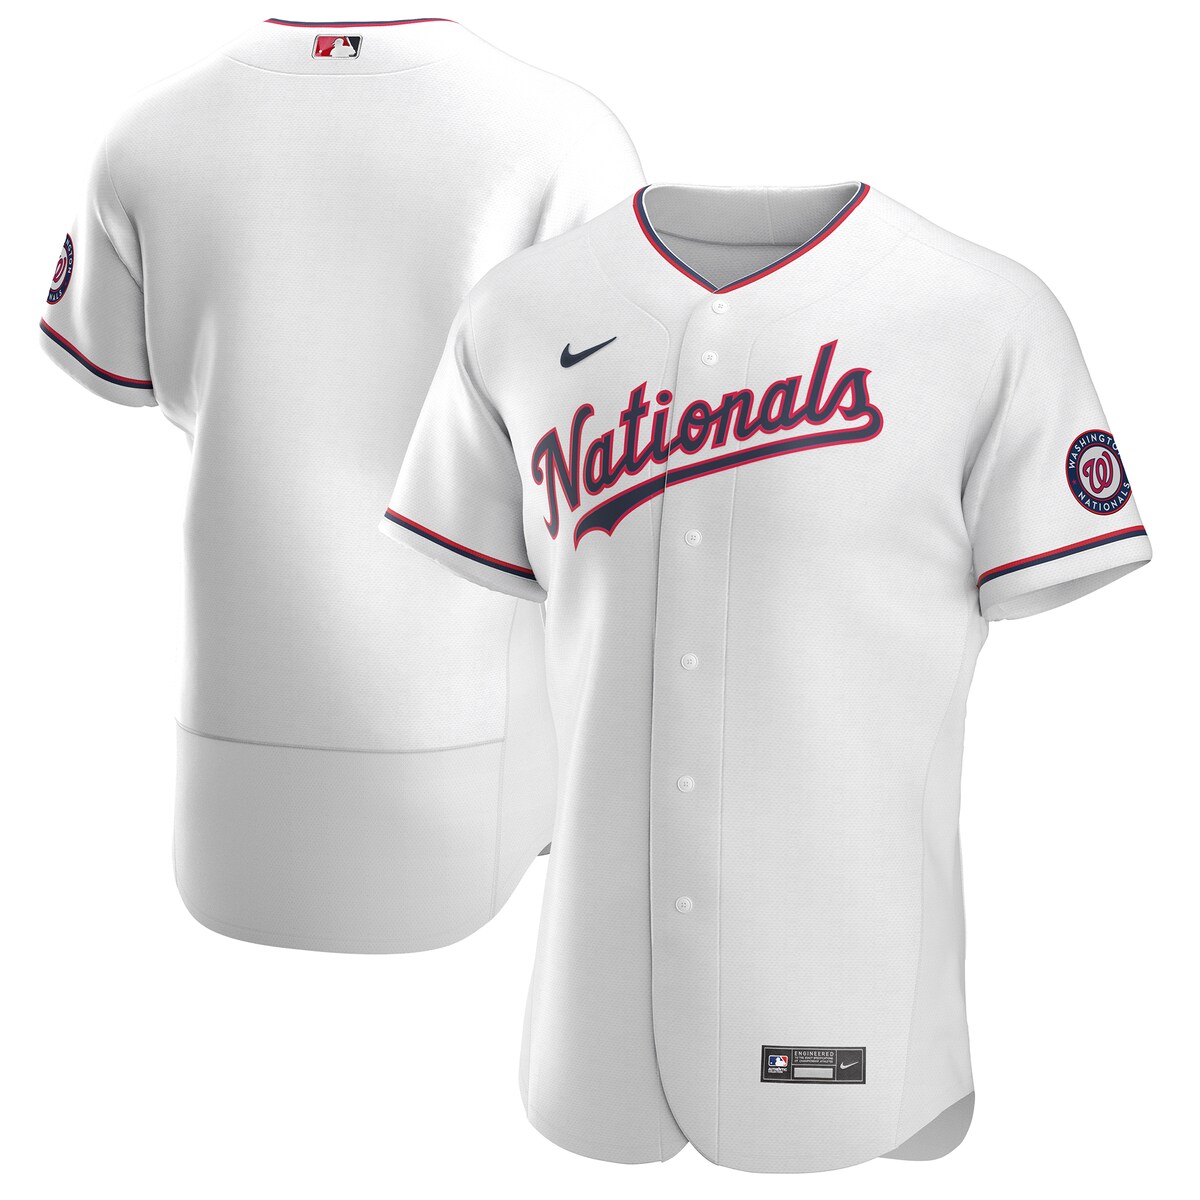 MLB iViY I[ZeBbN jtH[ Nike iCL Y zCg (Men's MLB Nike Authentic Official Team Jersey)